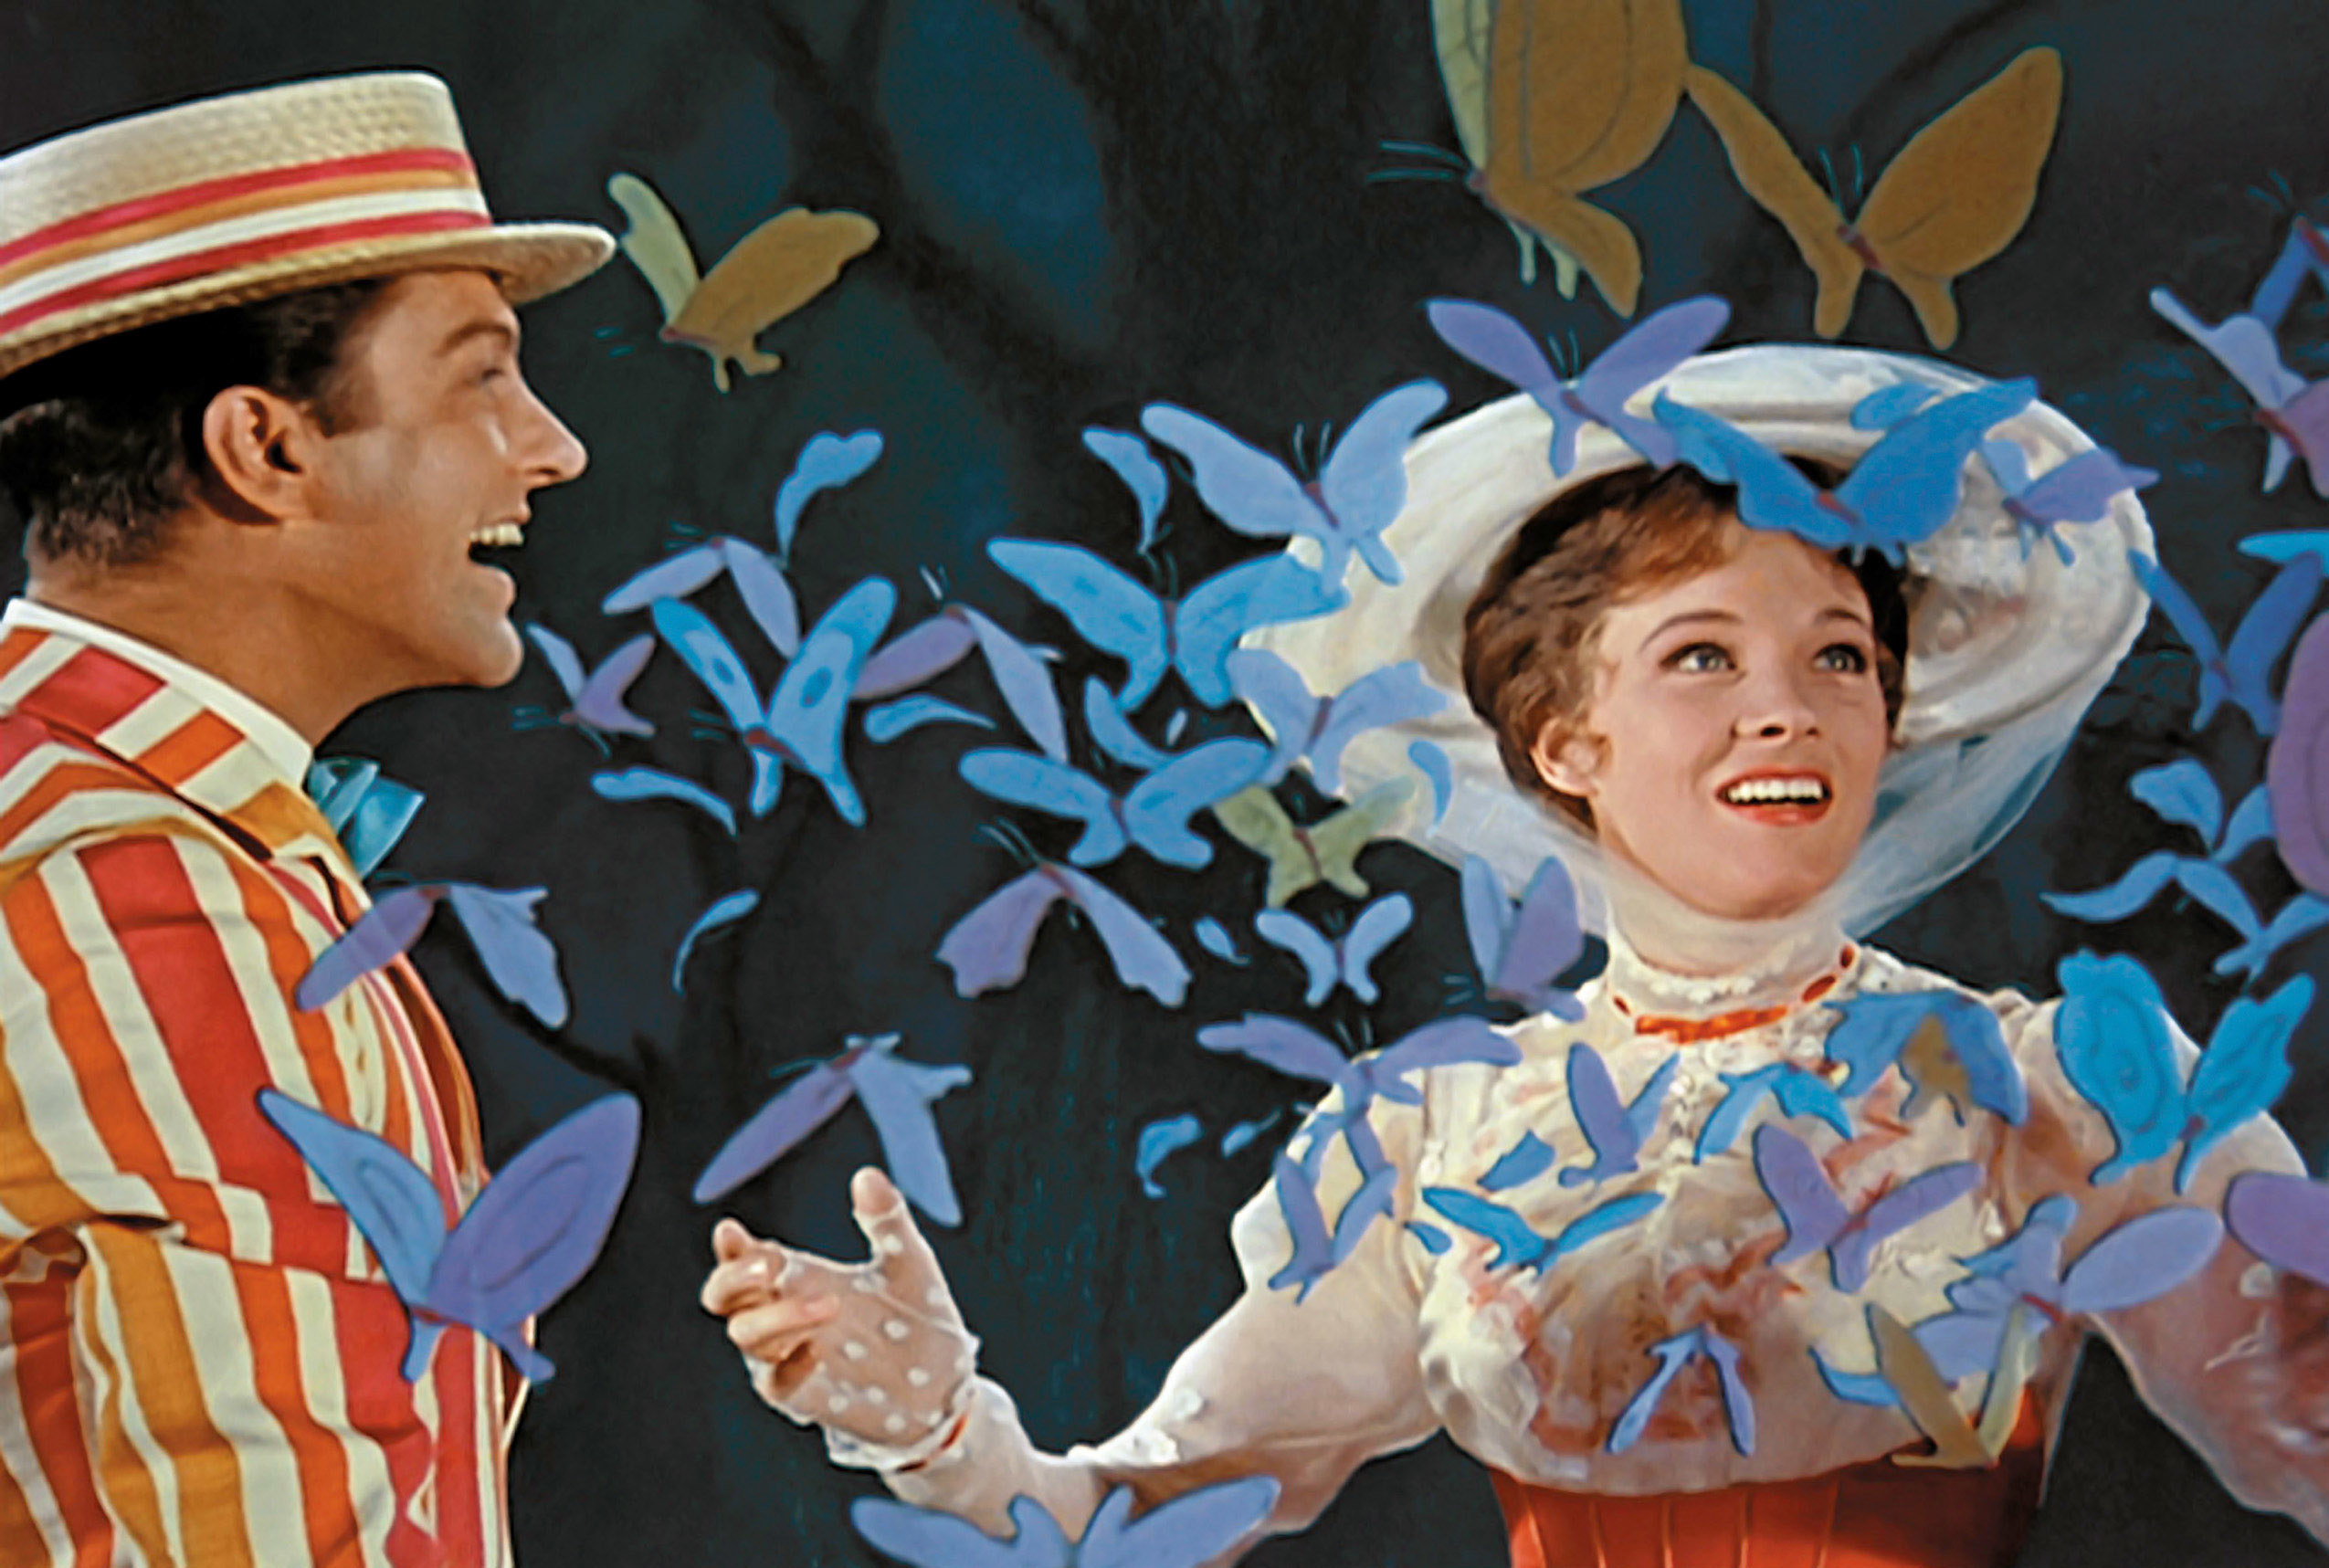 Mary Poppins surrounded by animated butterflies